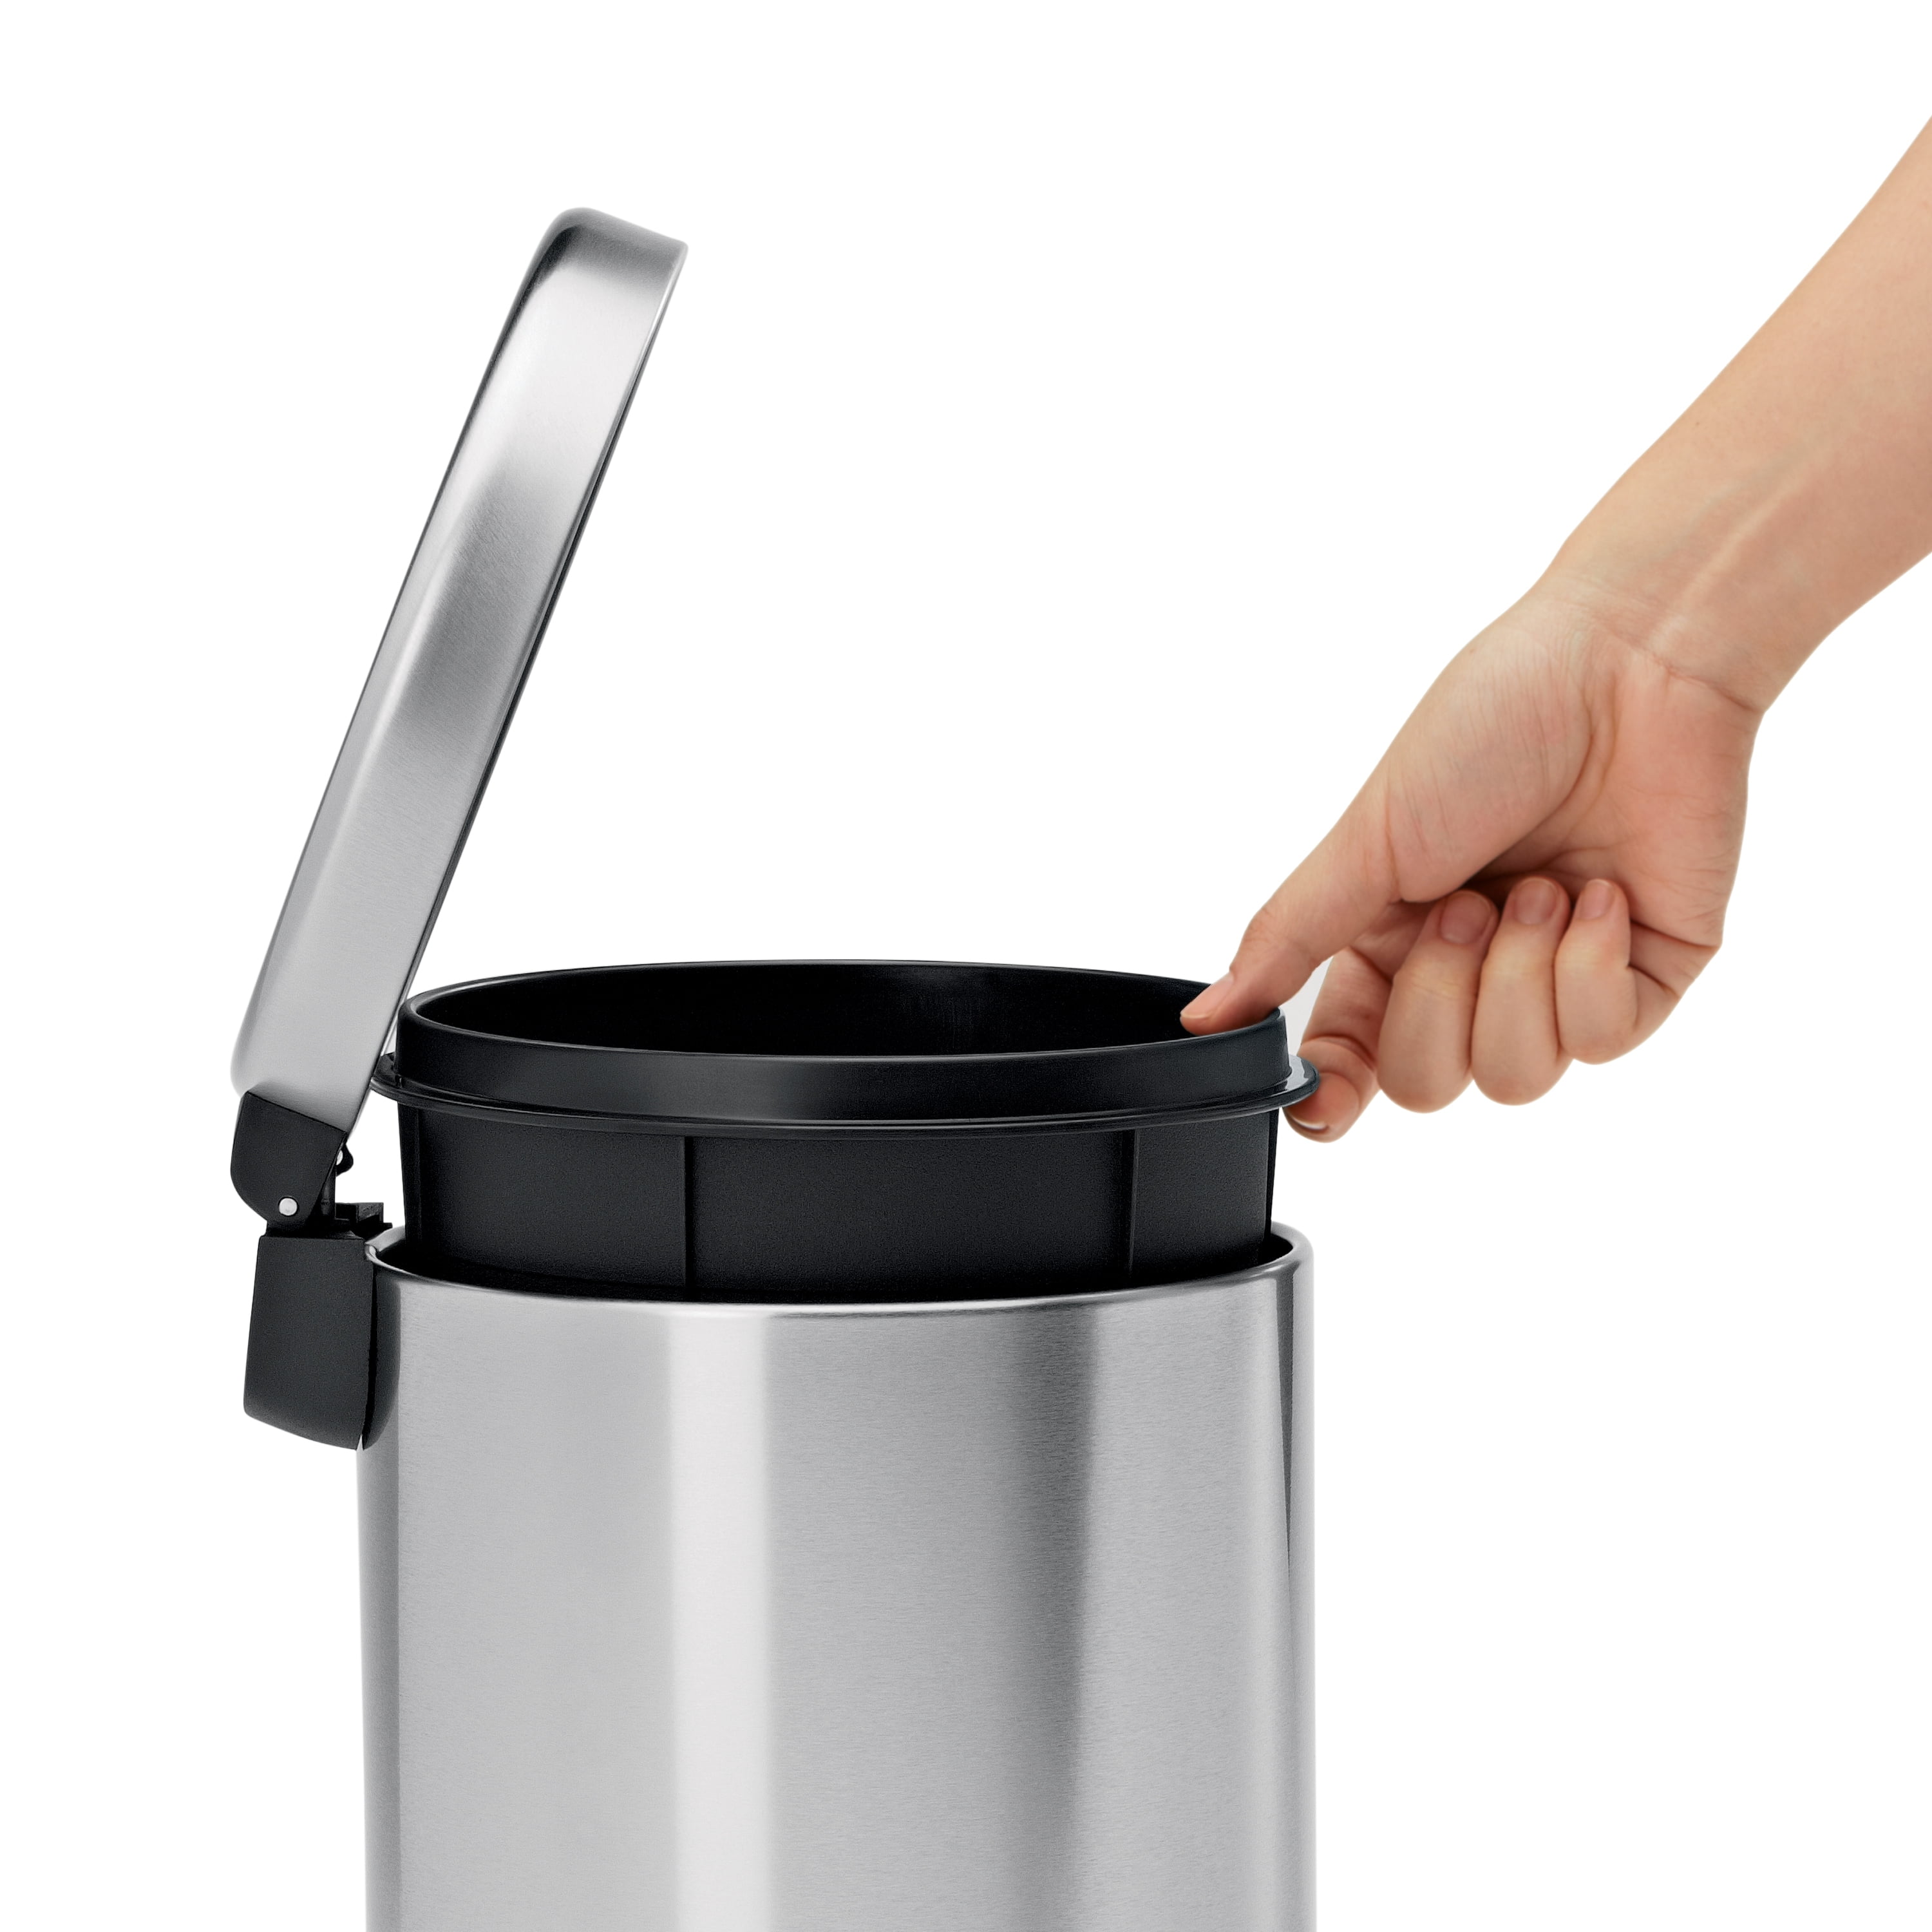 simplehuman, Brushed Stainless Steel 1.5 Liter / 0.4 Gallon Mini Countertop Trash Can